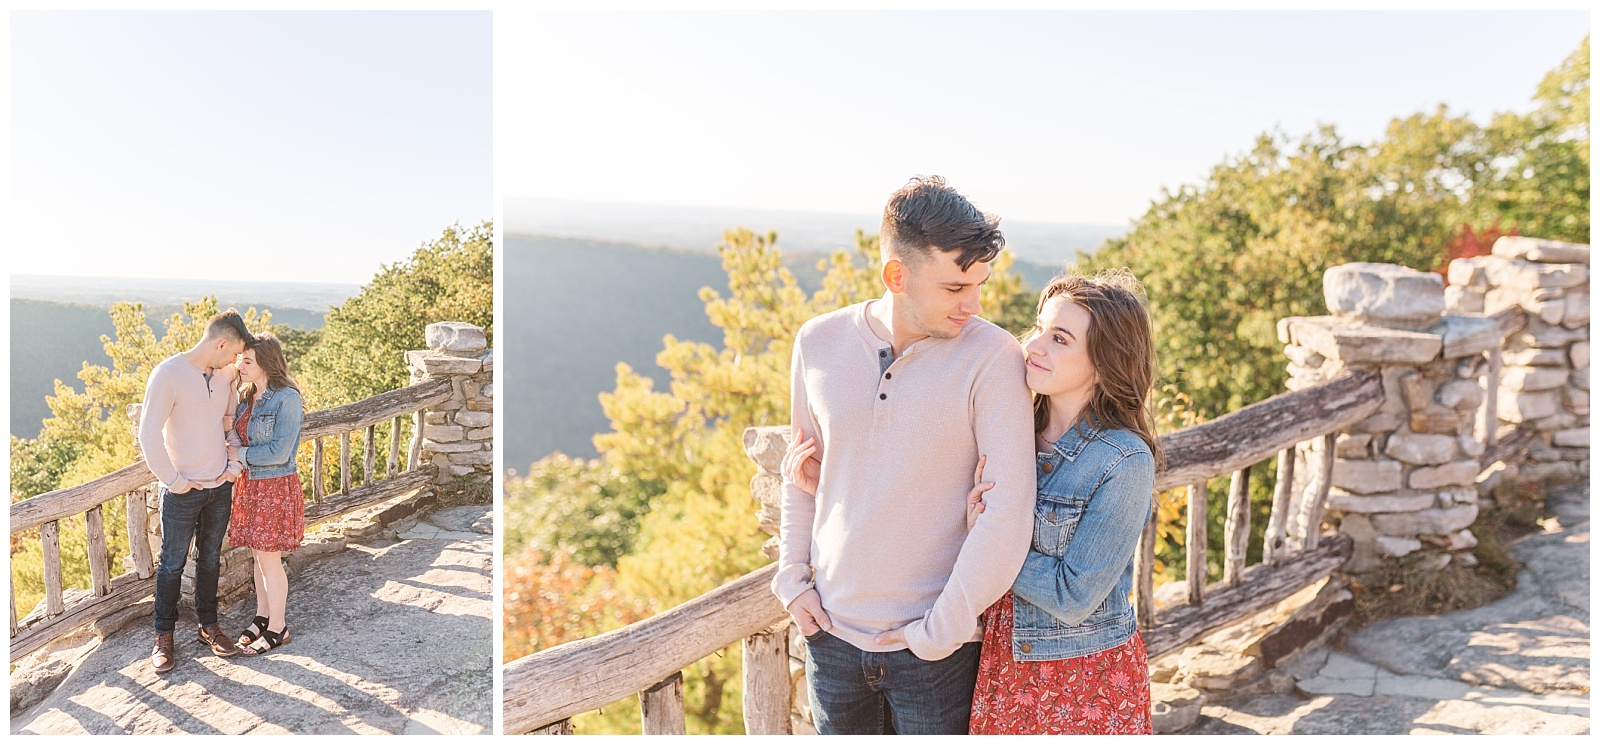 Cooper's Rock Engagement Session